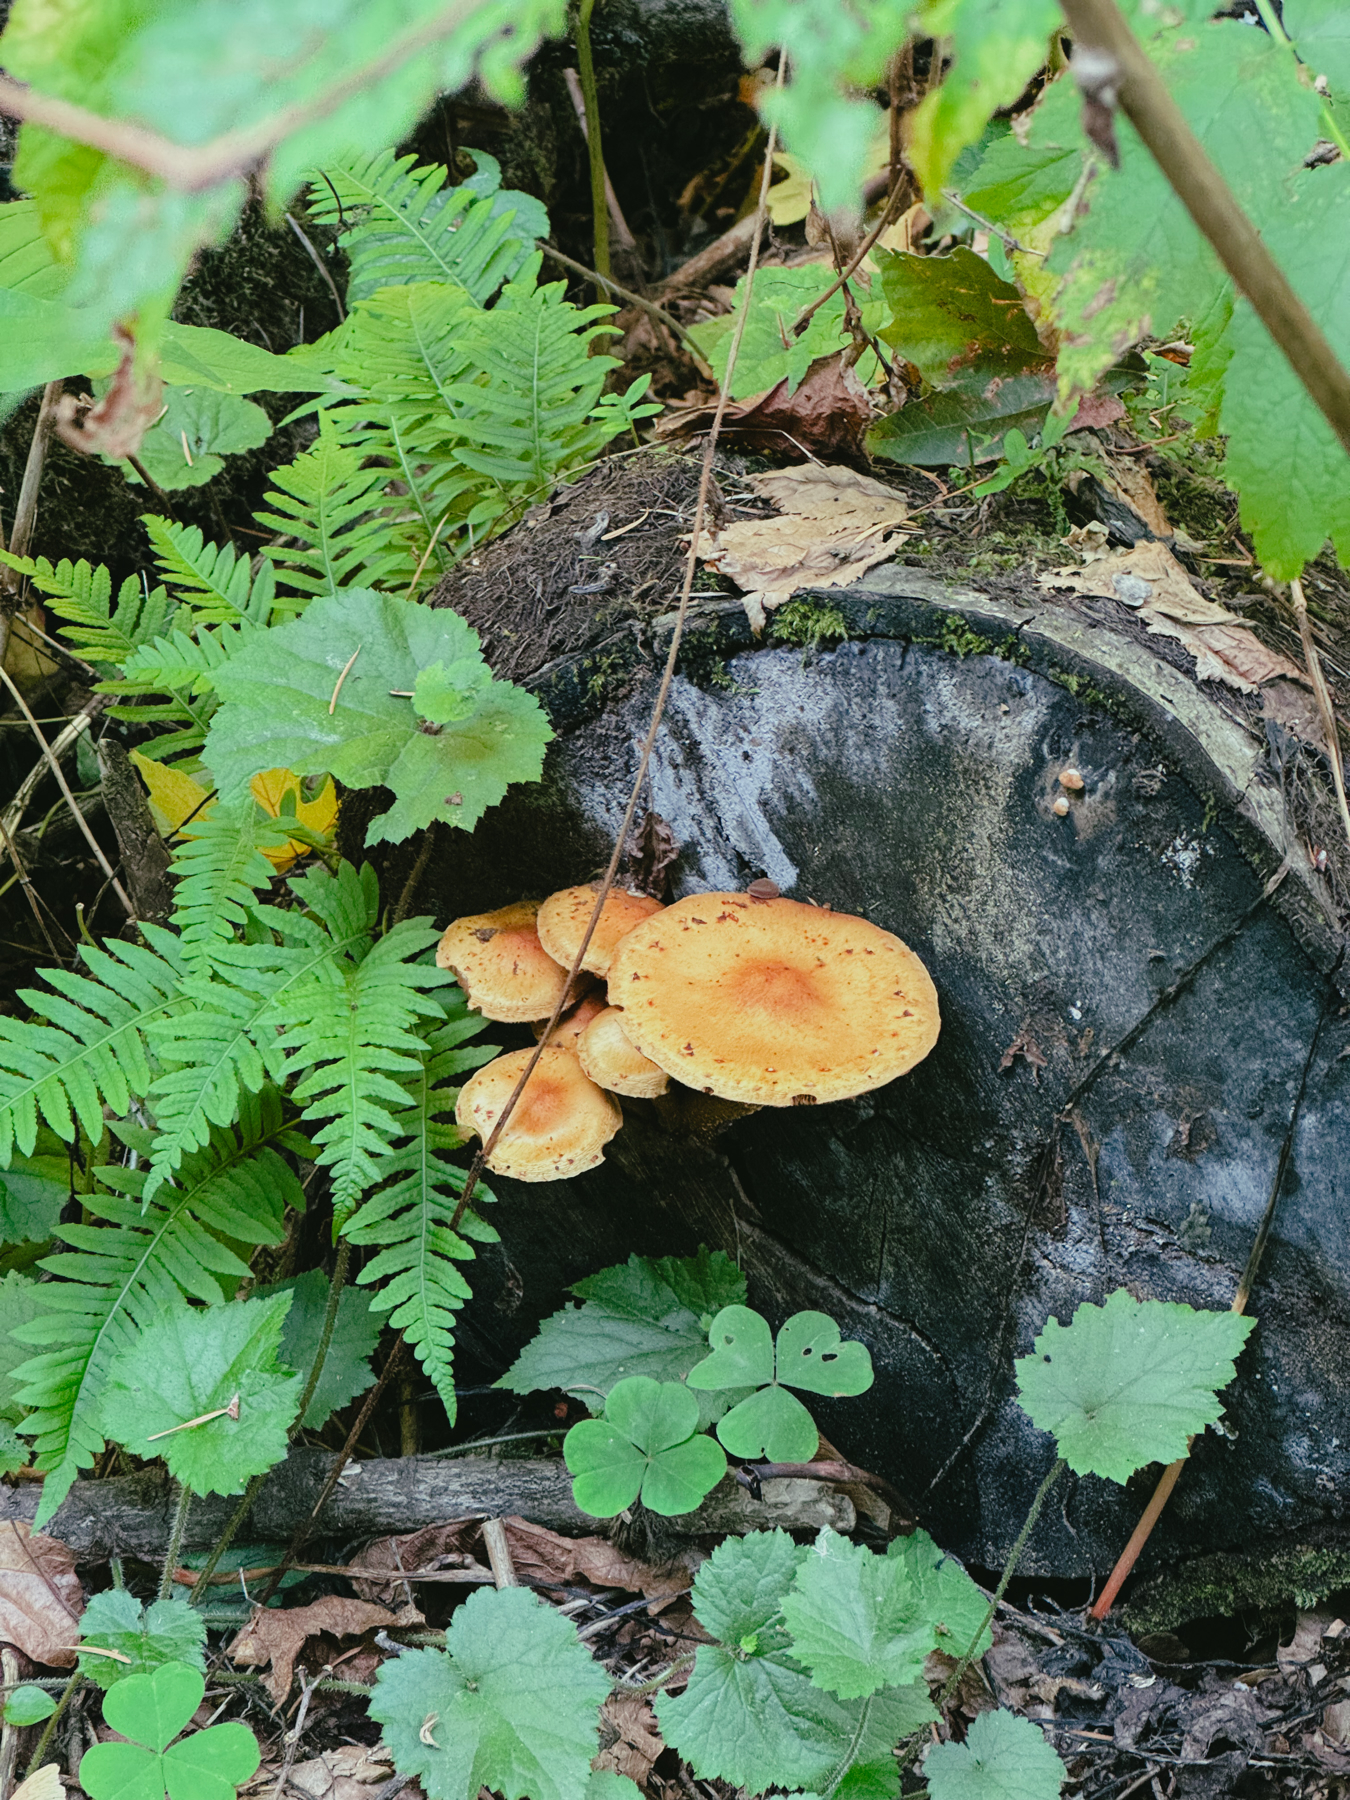 Flat yellowish mushrooms grow out the face of a fallen tree trunk. They are surrounded by green germs and leaves.